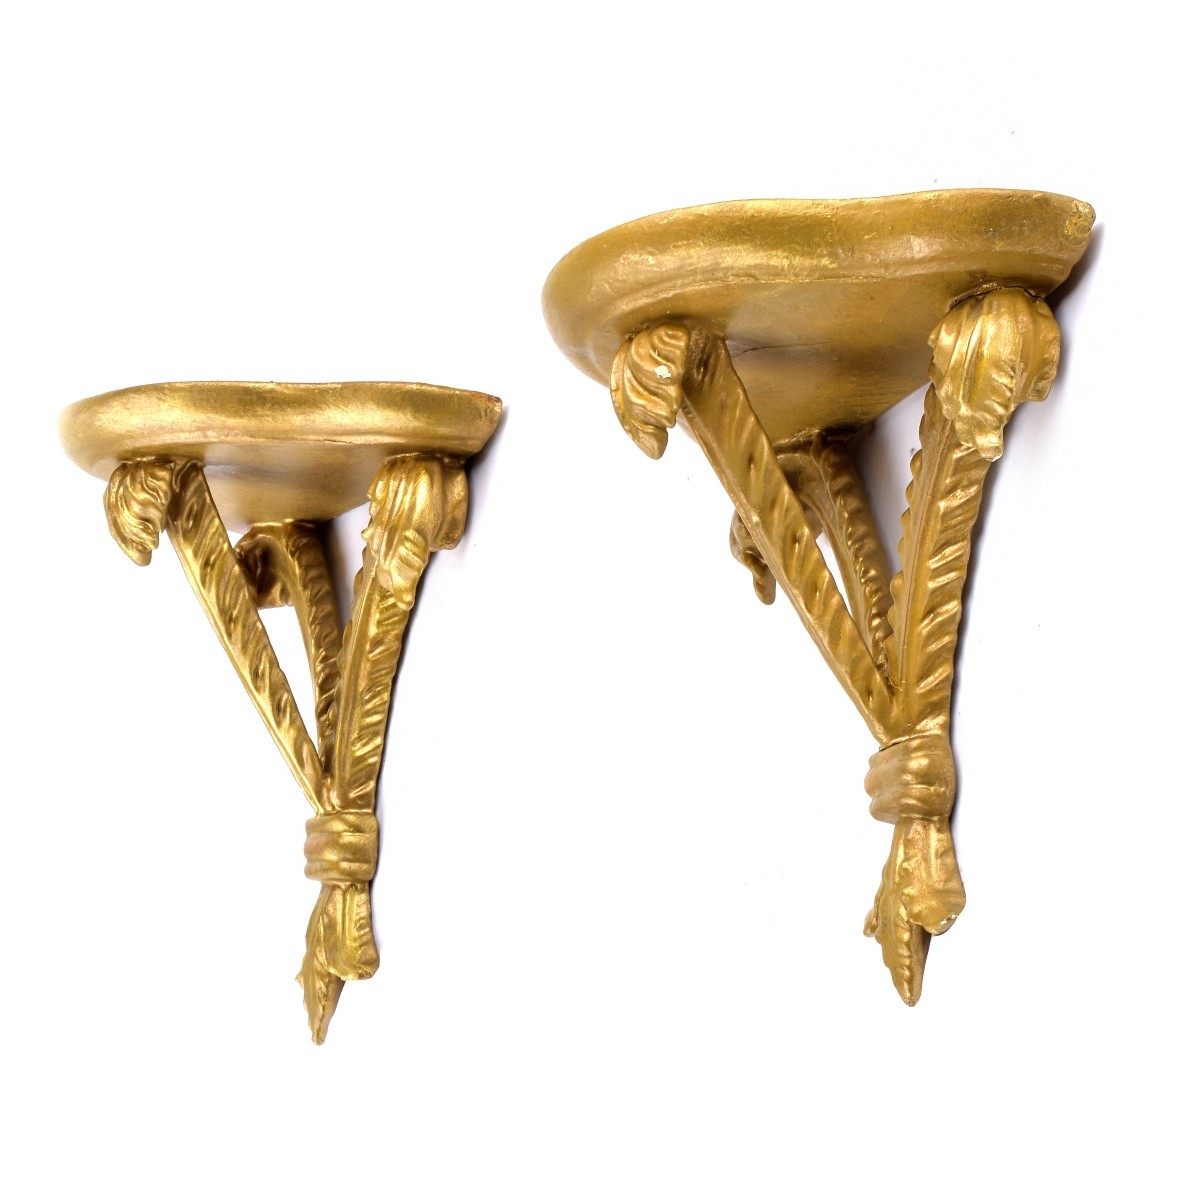 Giltwood Carved Wall Bracket